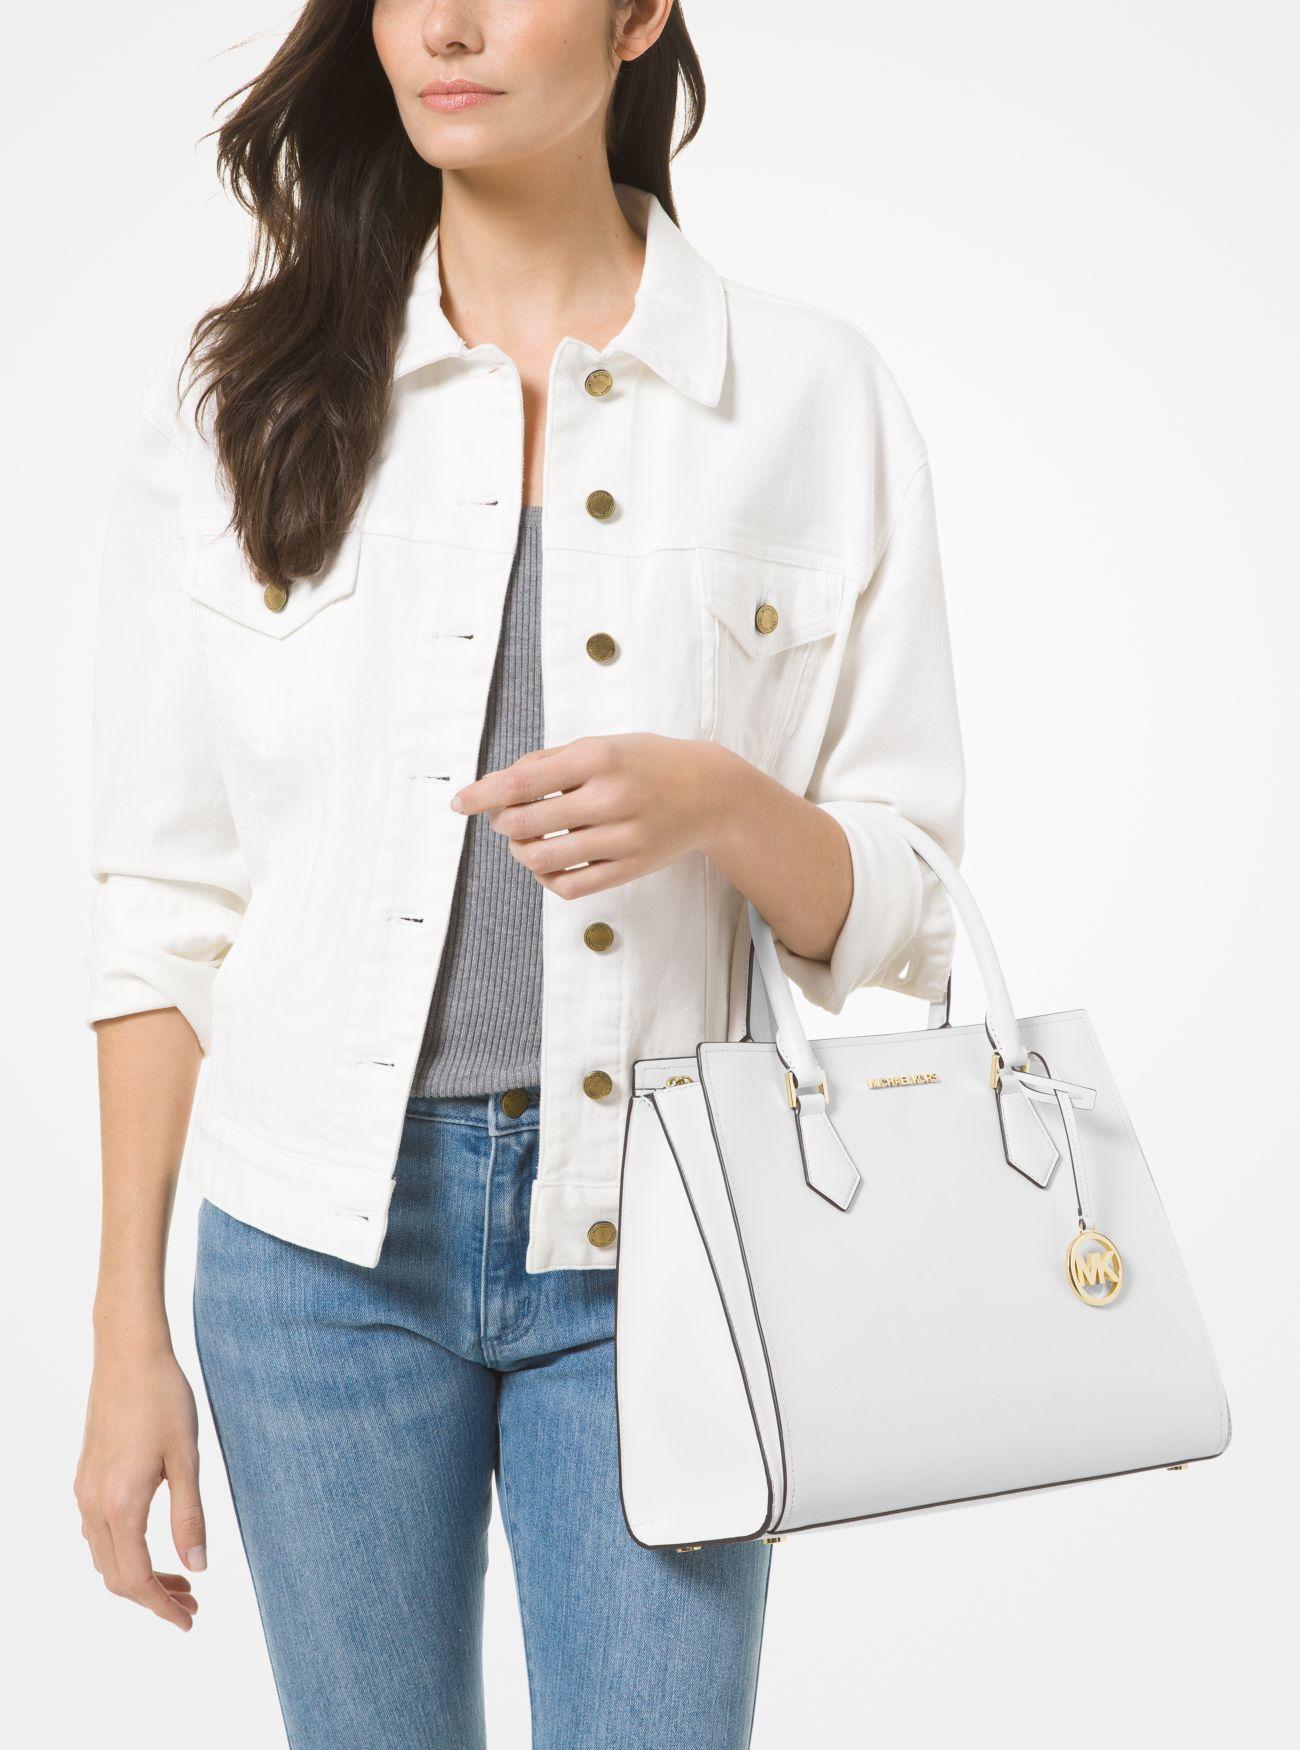 Michael Kors Hope Large Saffiano Leather Satchel in White | Lyst